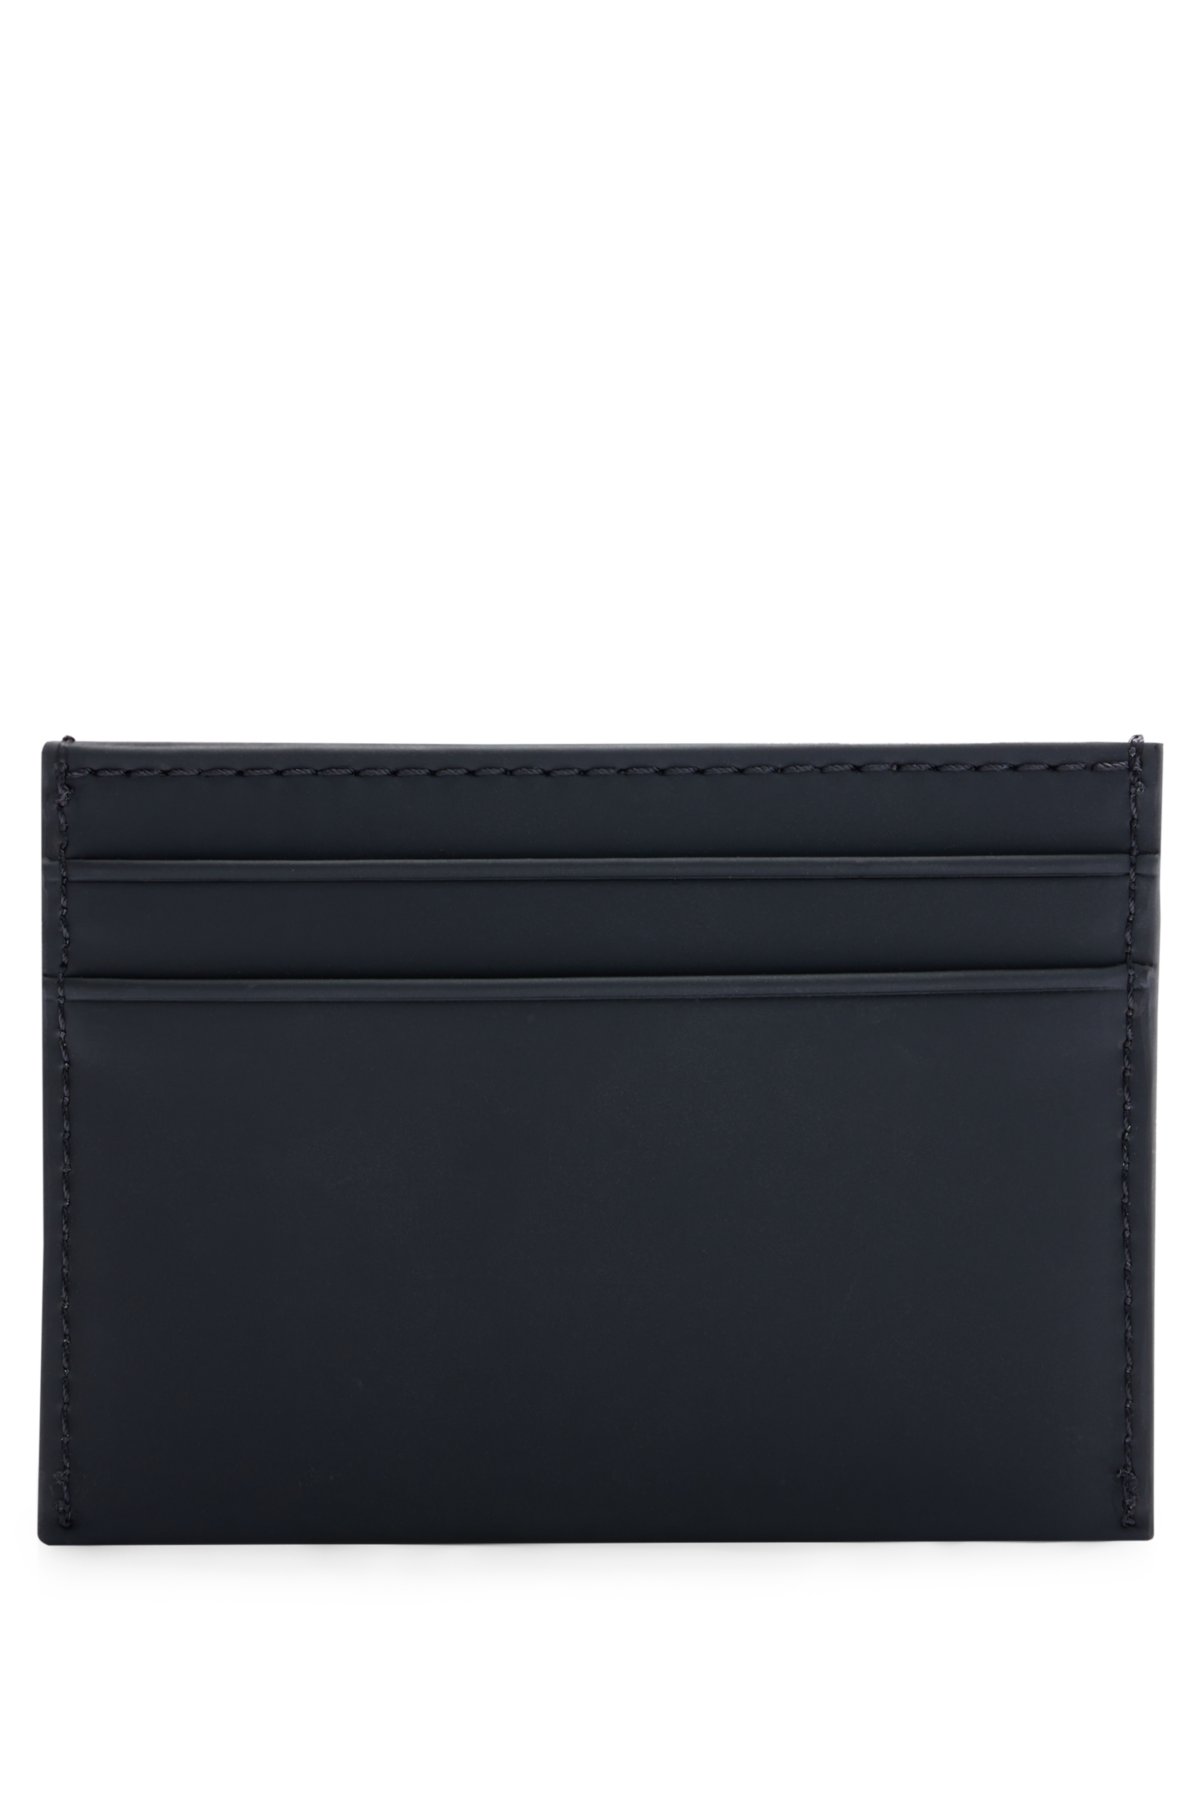 Faux-leather card holder with contrast logo, Black